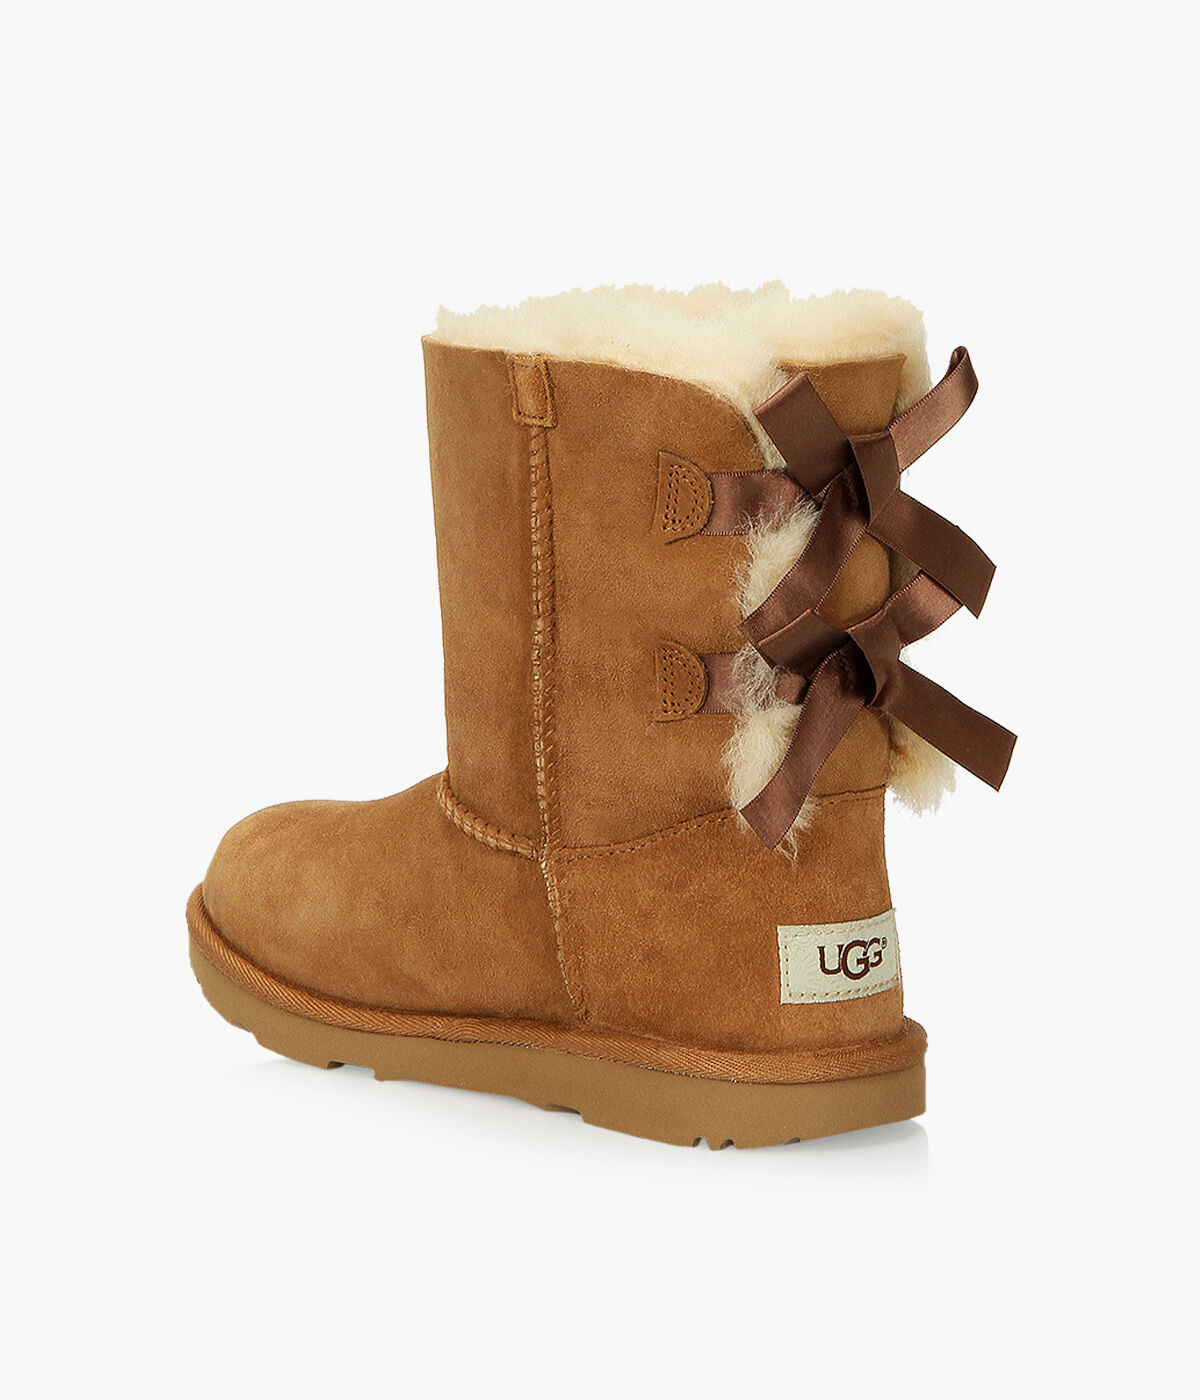 new bailey bow uggs